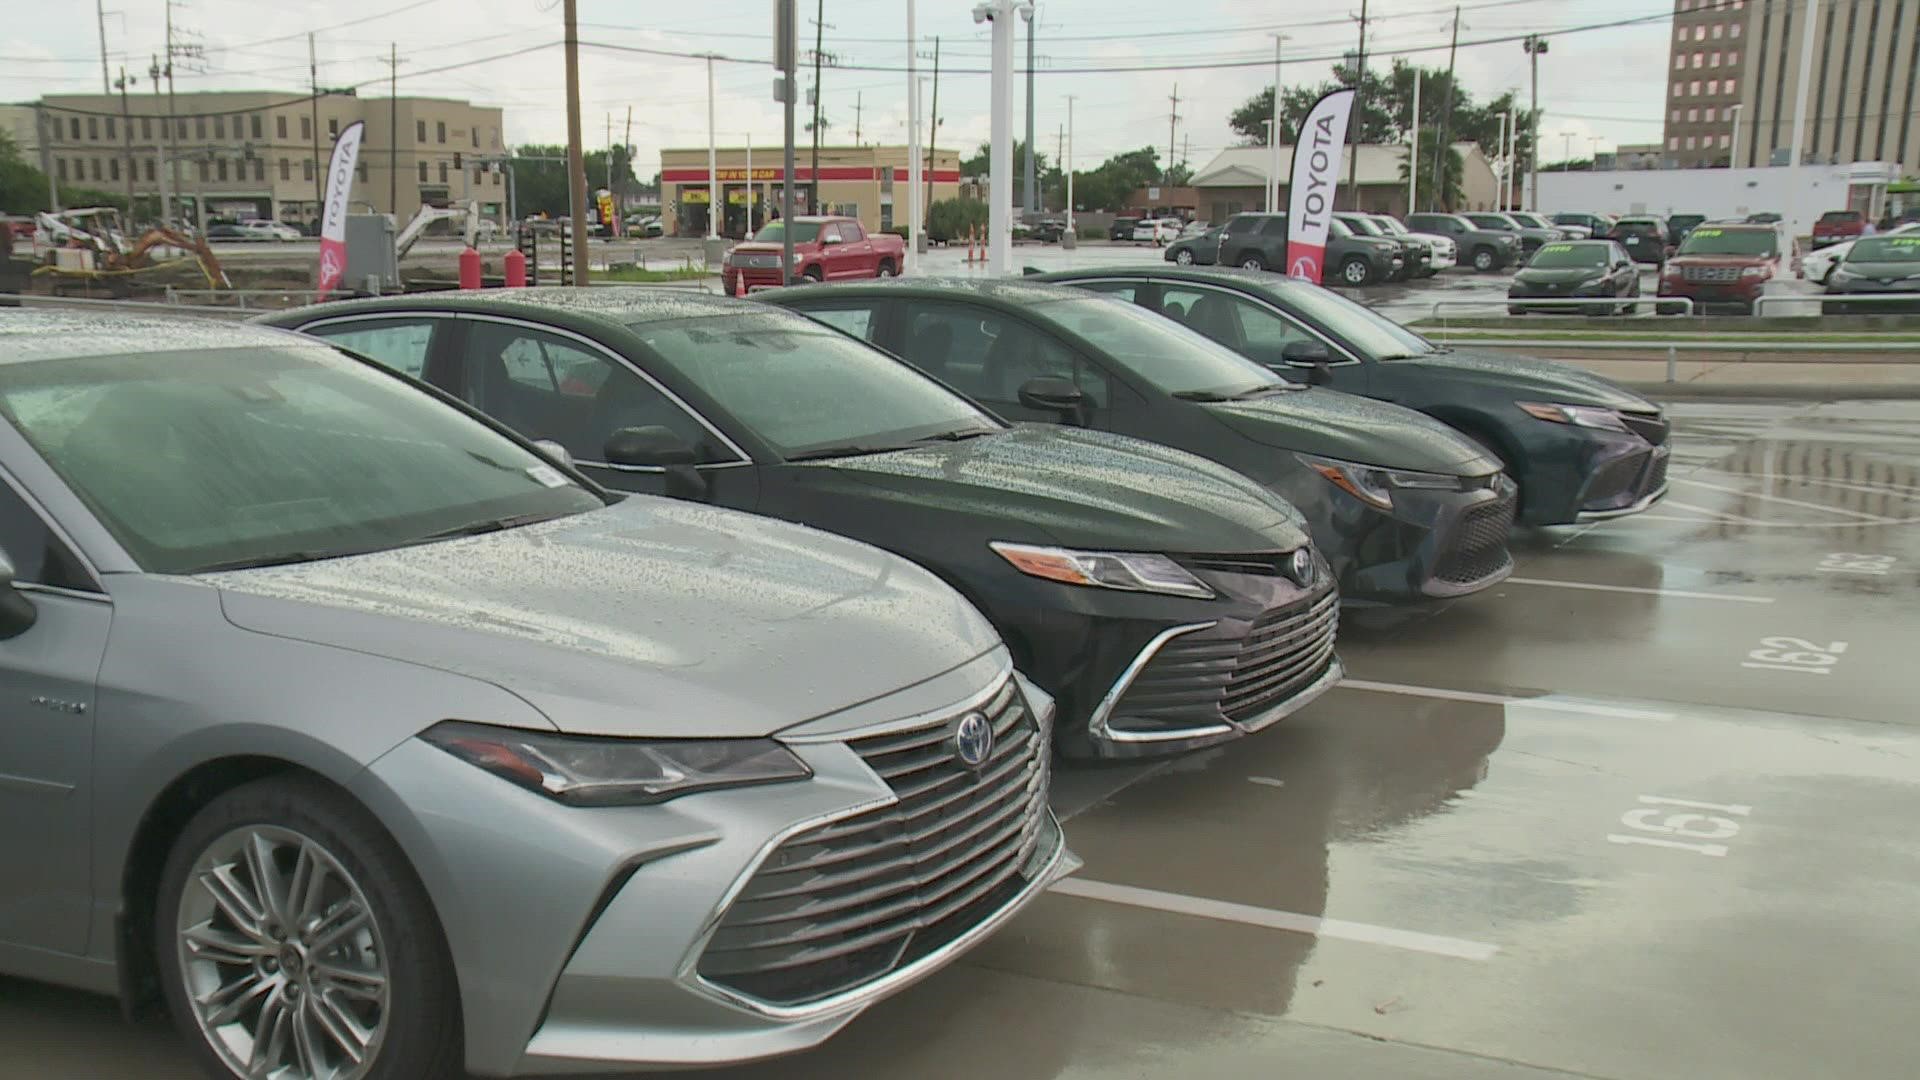 Due to production shortage, the supply of new cars have fallen and some dealerships are having a hard time getting inventory where it once was.